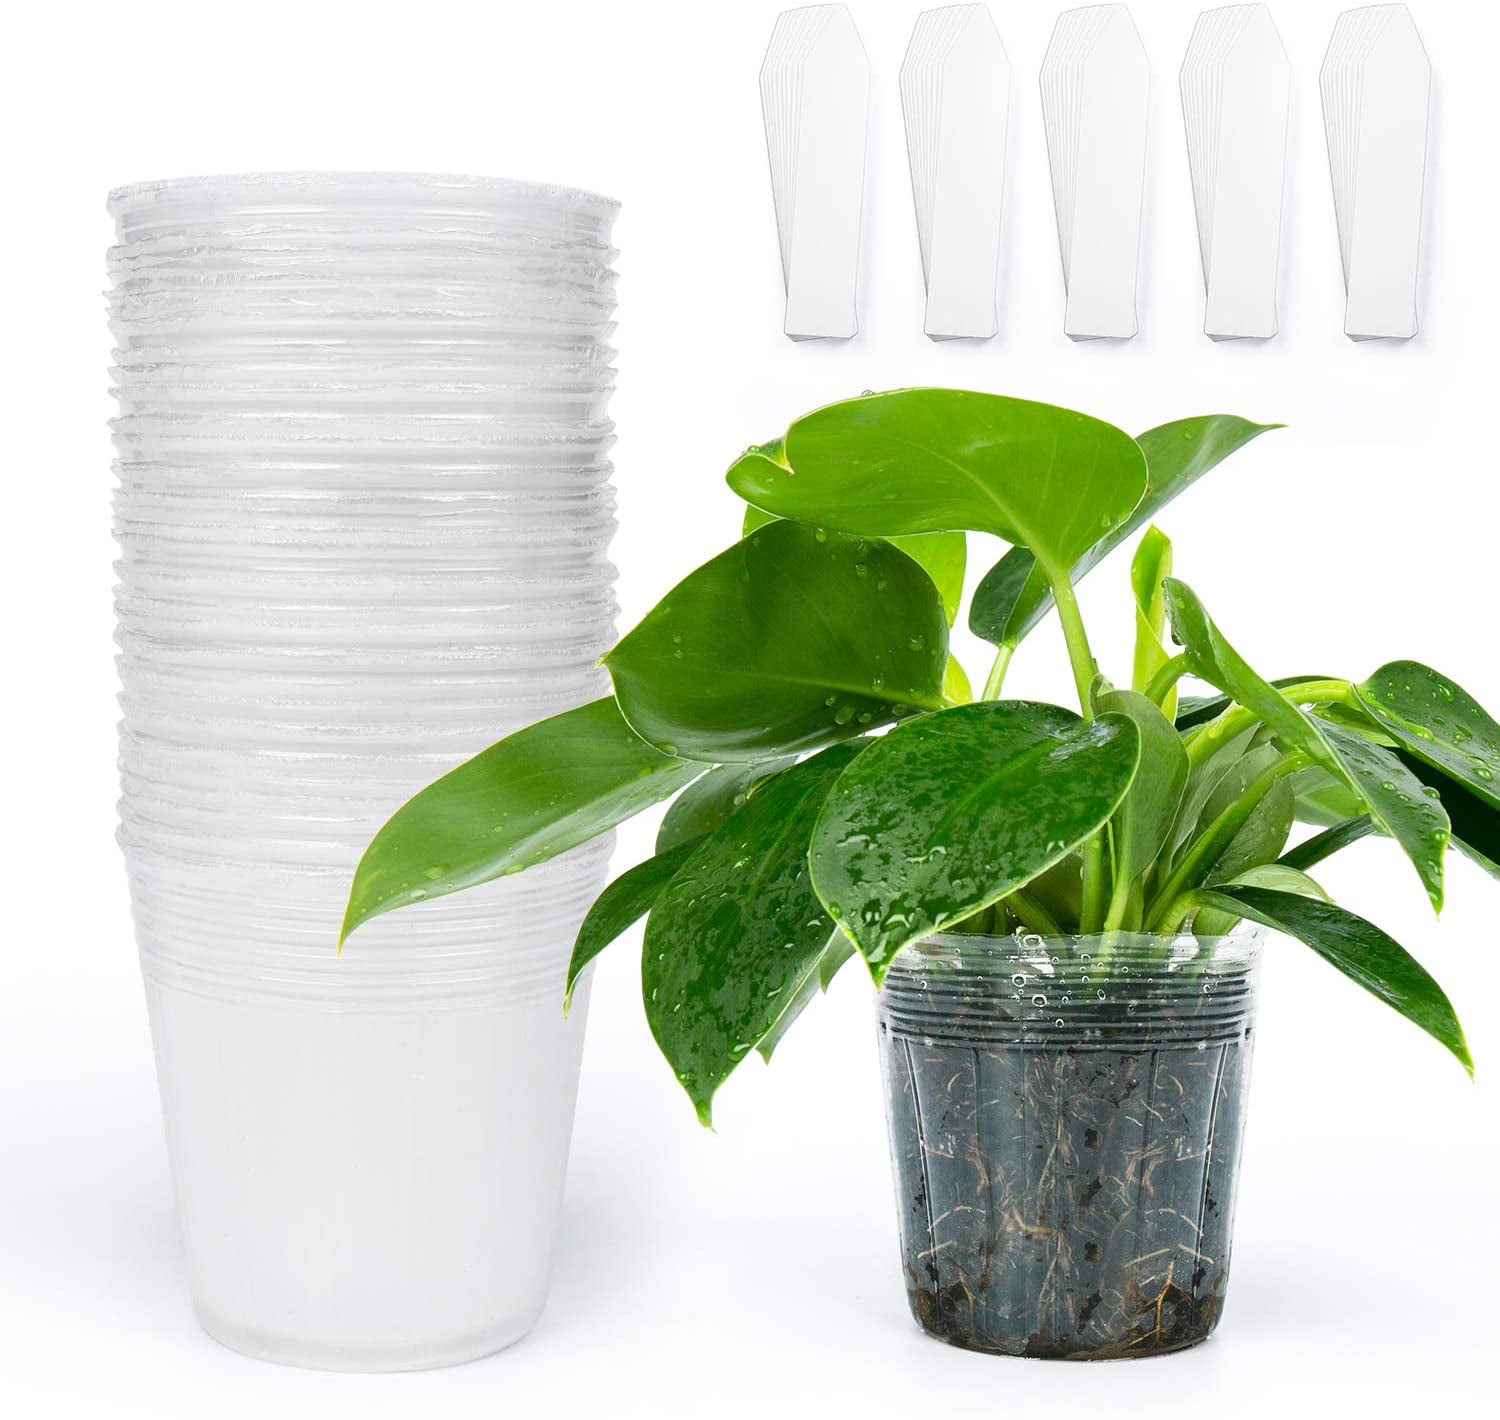 Details about   Oubest Plastic Plant Nursery Pots 4" 50 Pcs Reusable For Seed Starting Seedlings 